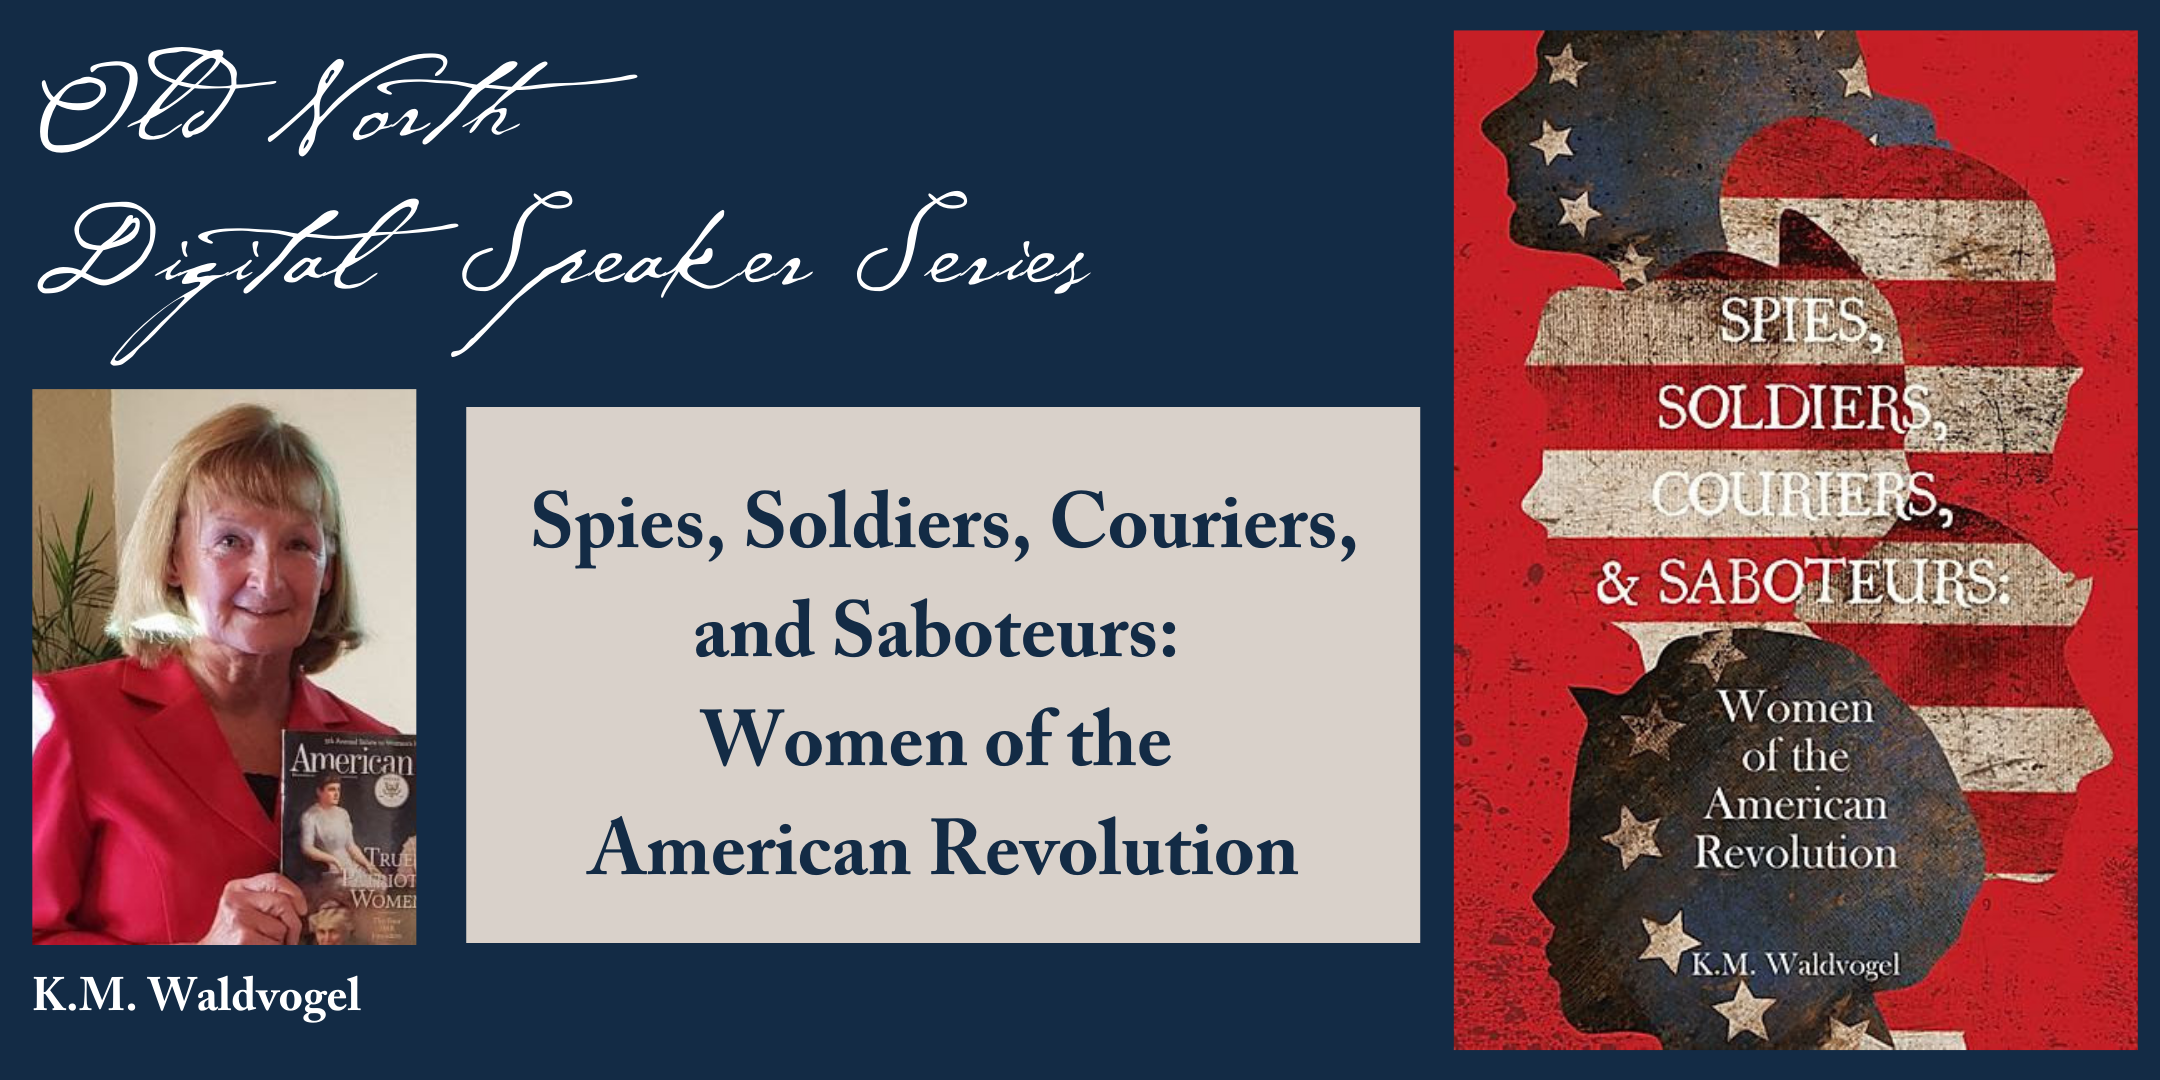 Spies, Soldiers, Couriers, and Saboteurs: Women of the American Revolution